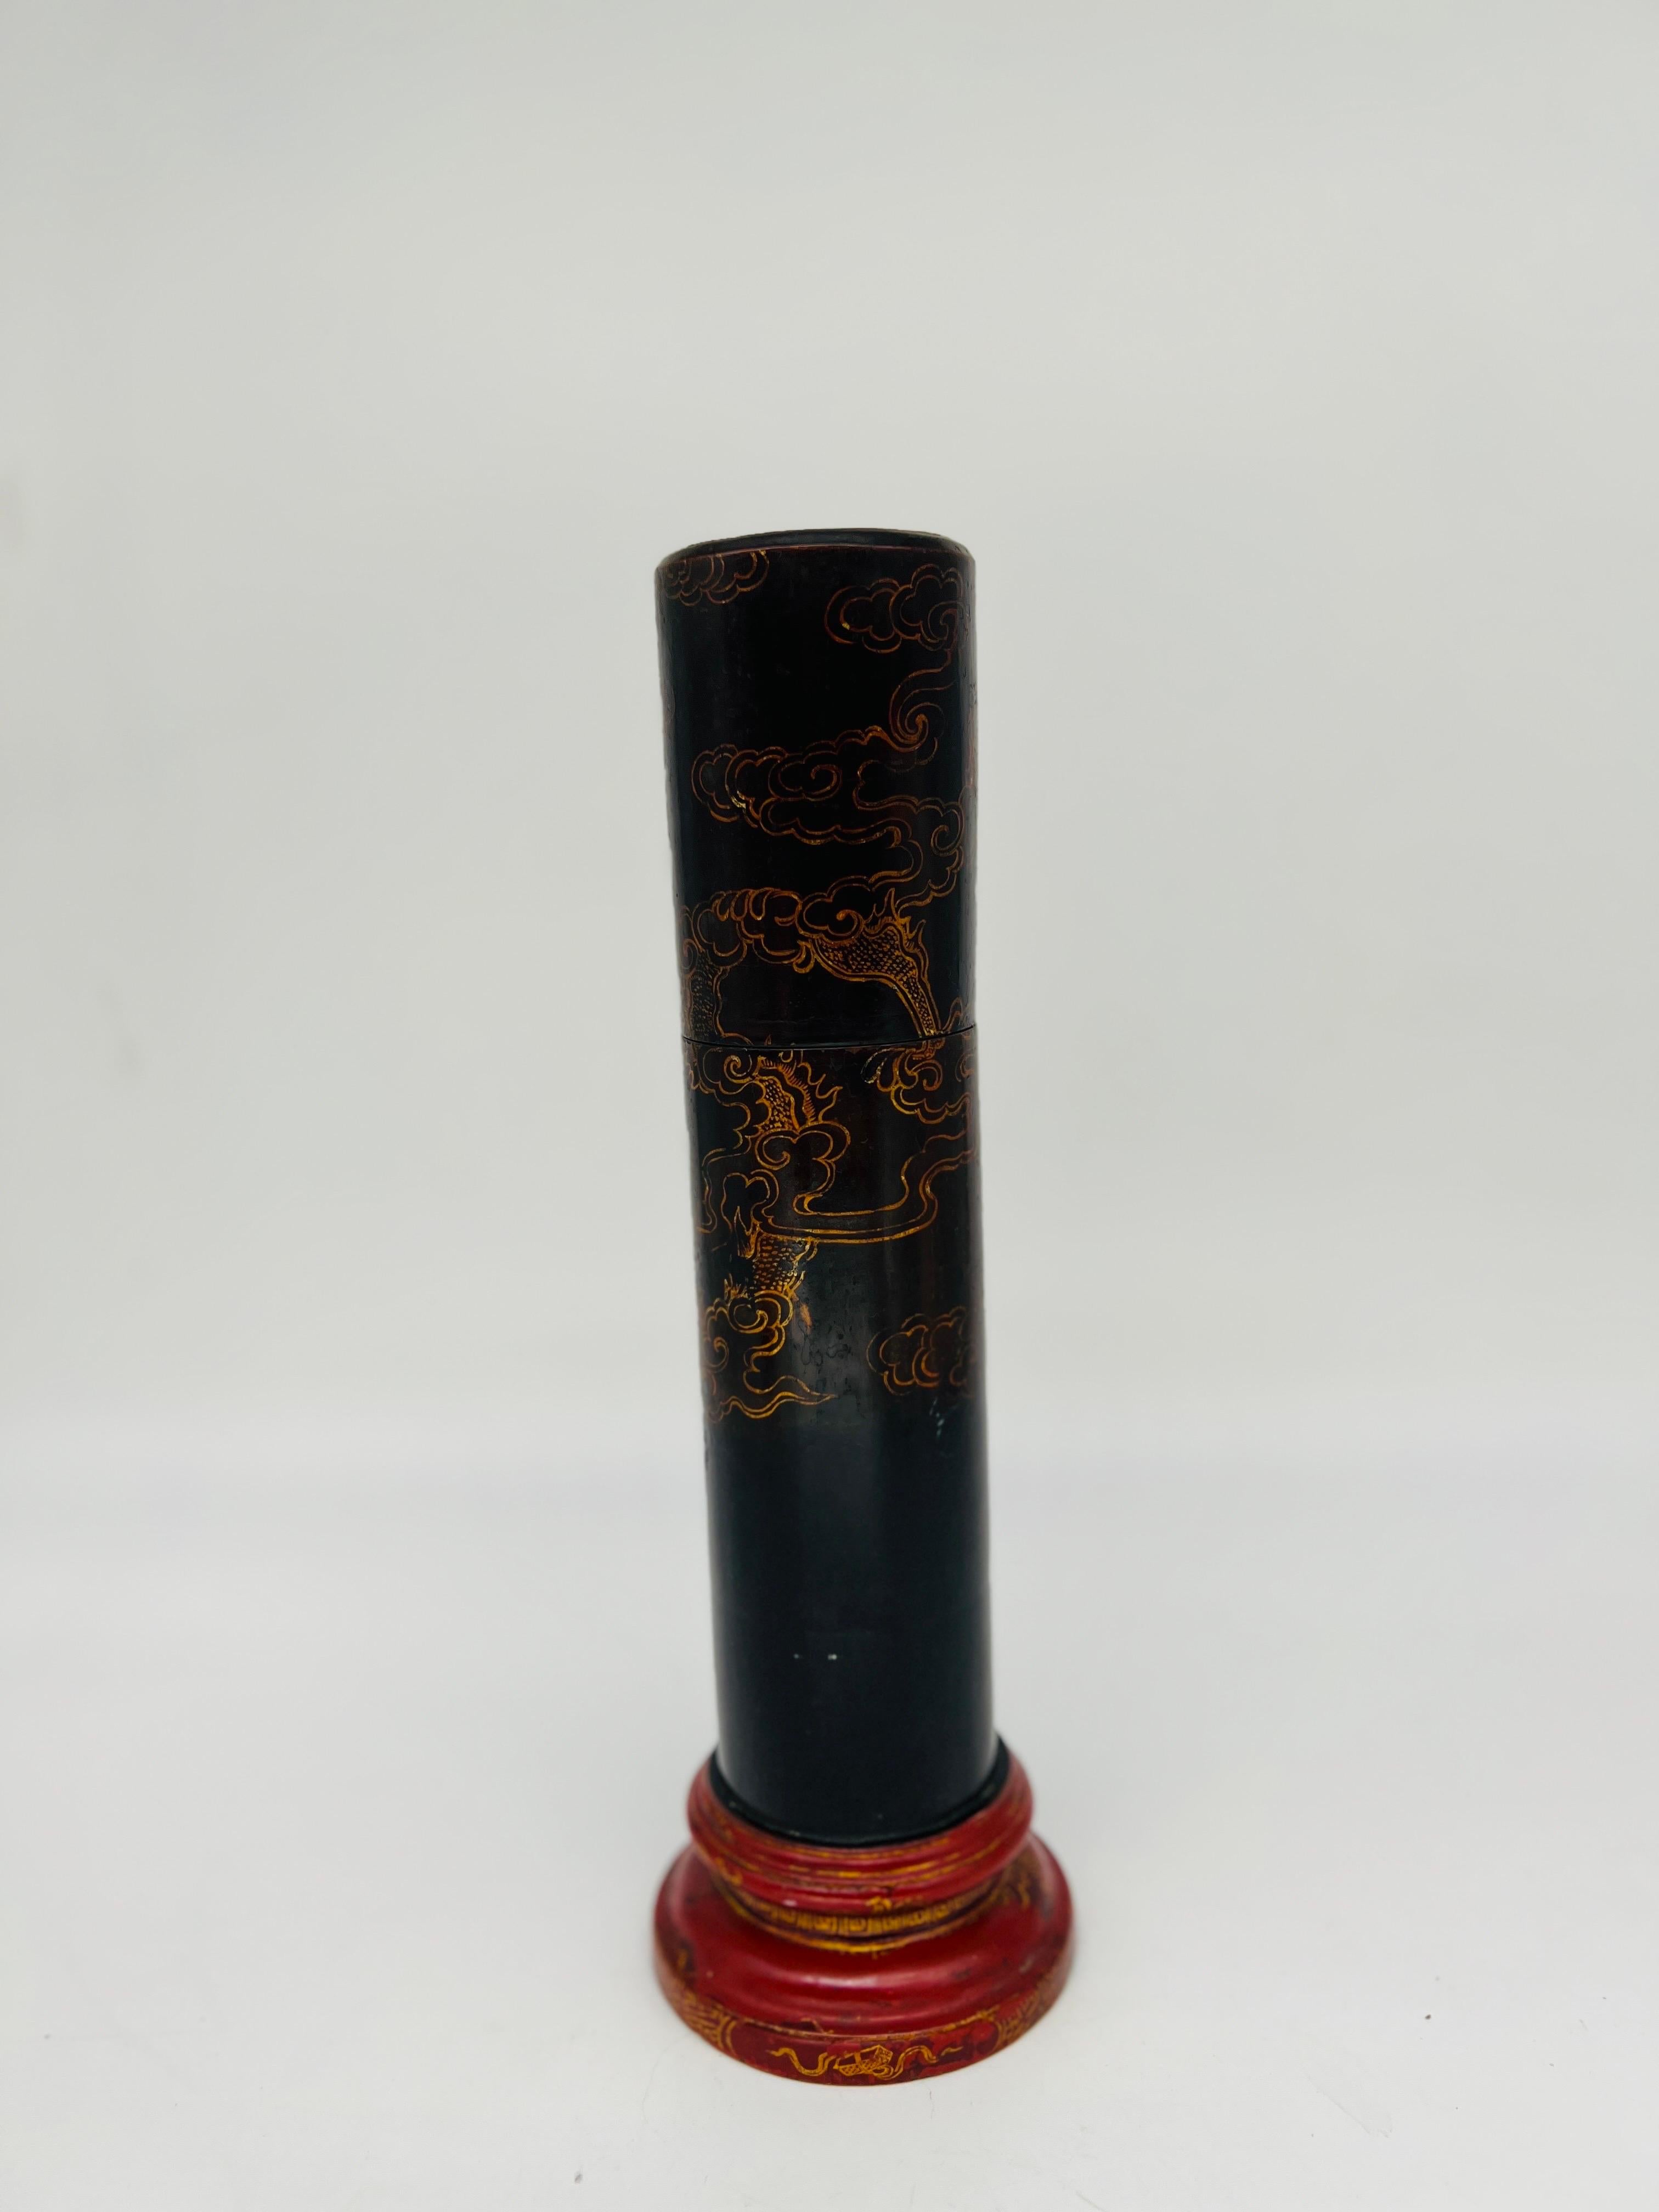 Vintage Japanese Lacquerware Cylindrical Fireplace Matchstrike Box In Good Condition For Sale In Atlanta, GA